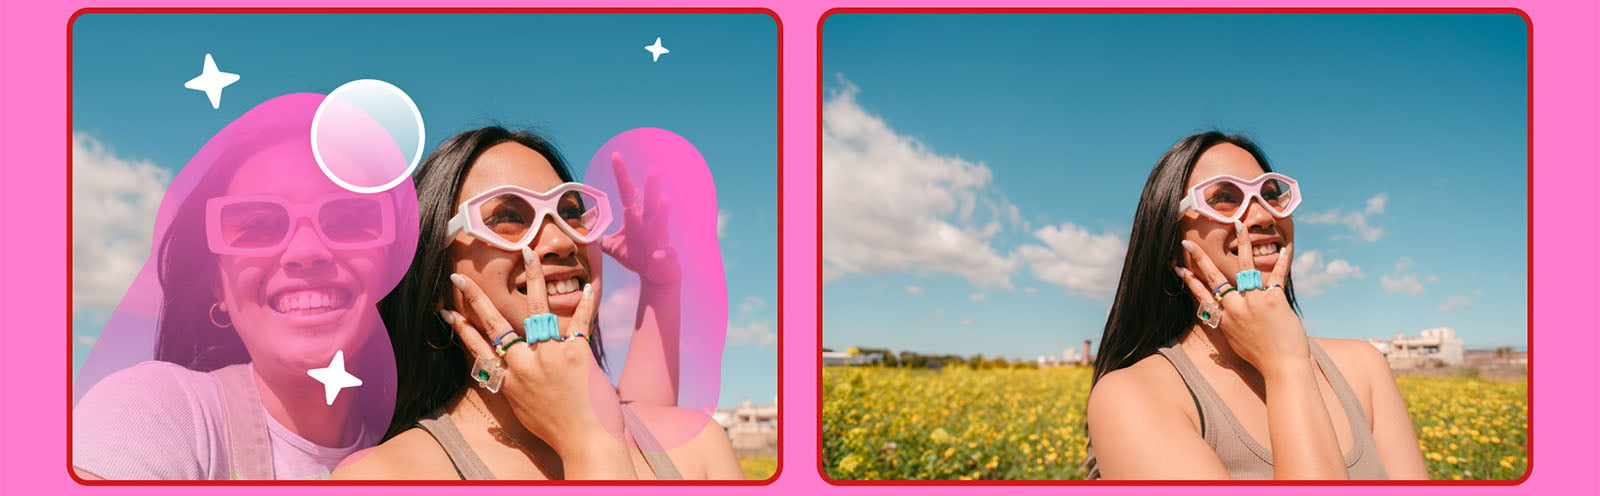 Two-panel image. on the left, two women wearing heart-shaped sunglasses smile in a colorful, graphical overlay. on the right, one woman still in heart-shaped sunglasses, touches her face joyfully in a sunny field.